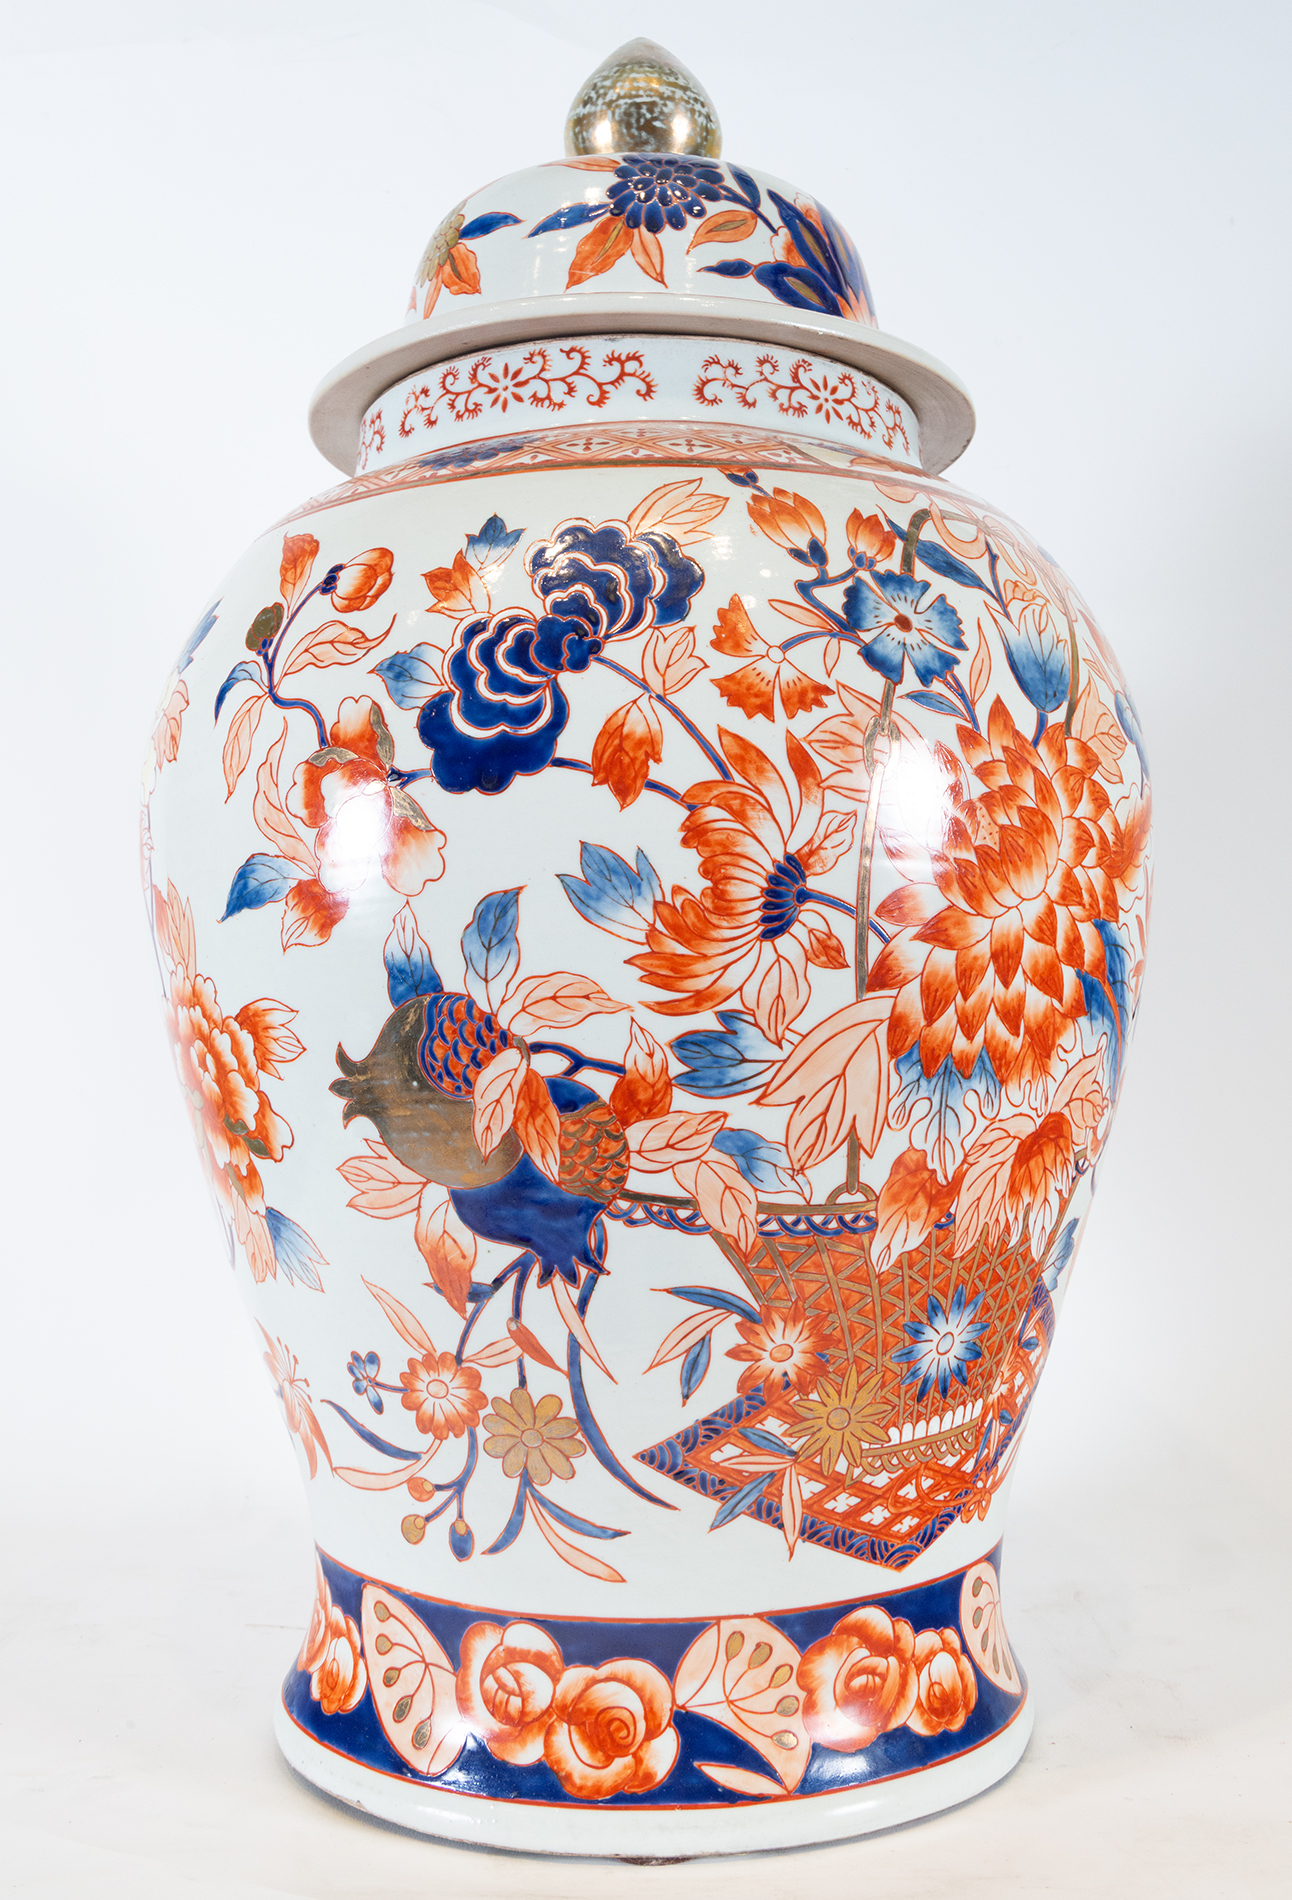 Elegant pair of Imari porcelain bowls, Chinese work from the 19th - 20th century - Image 4 of 5